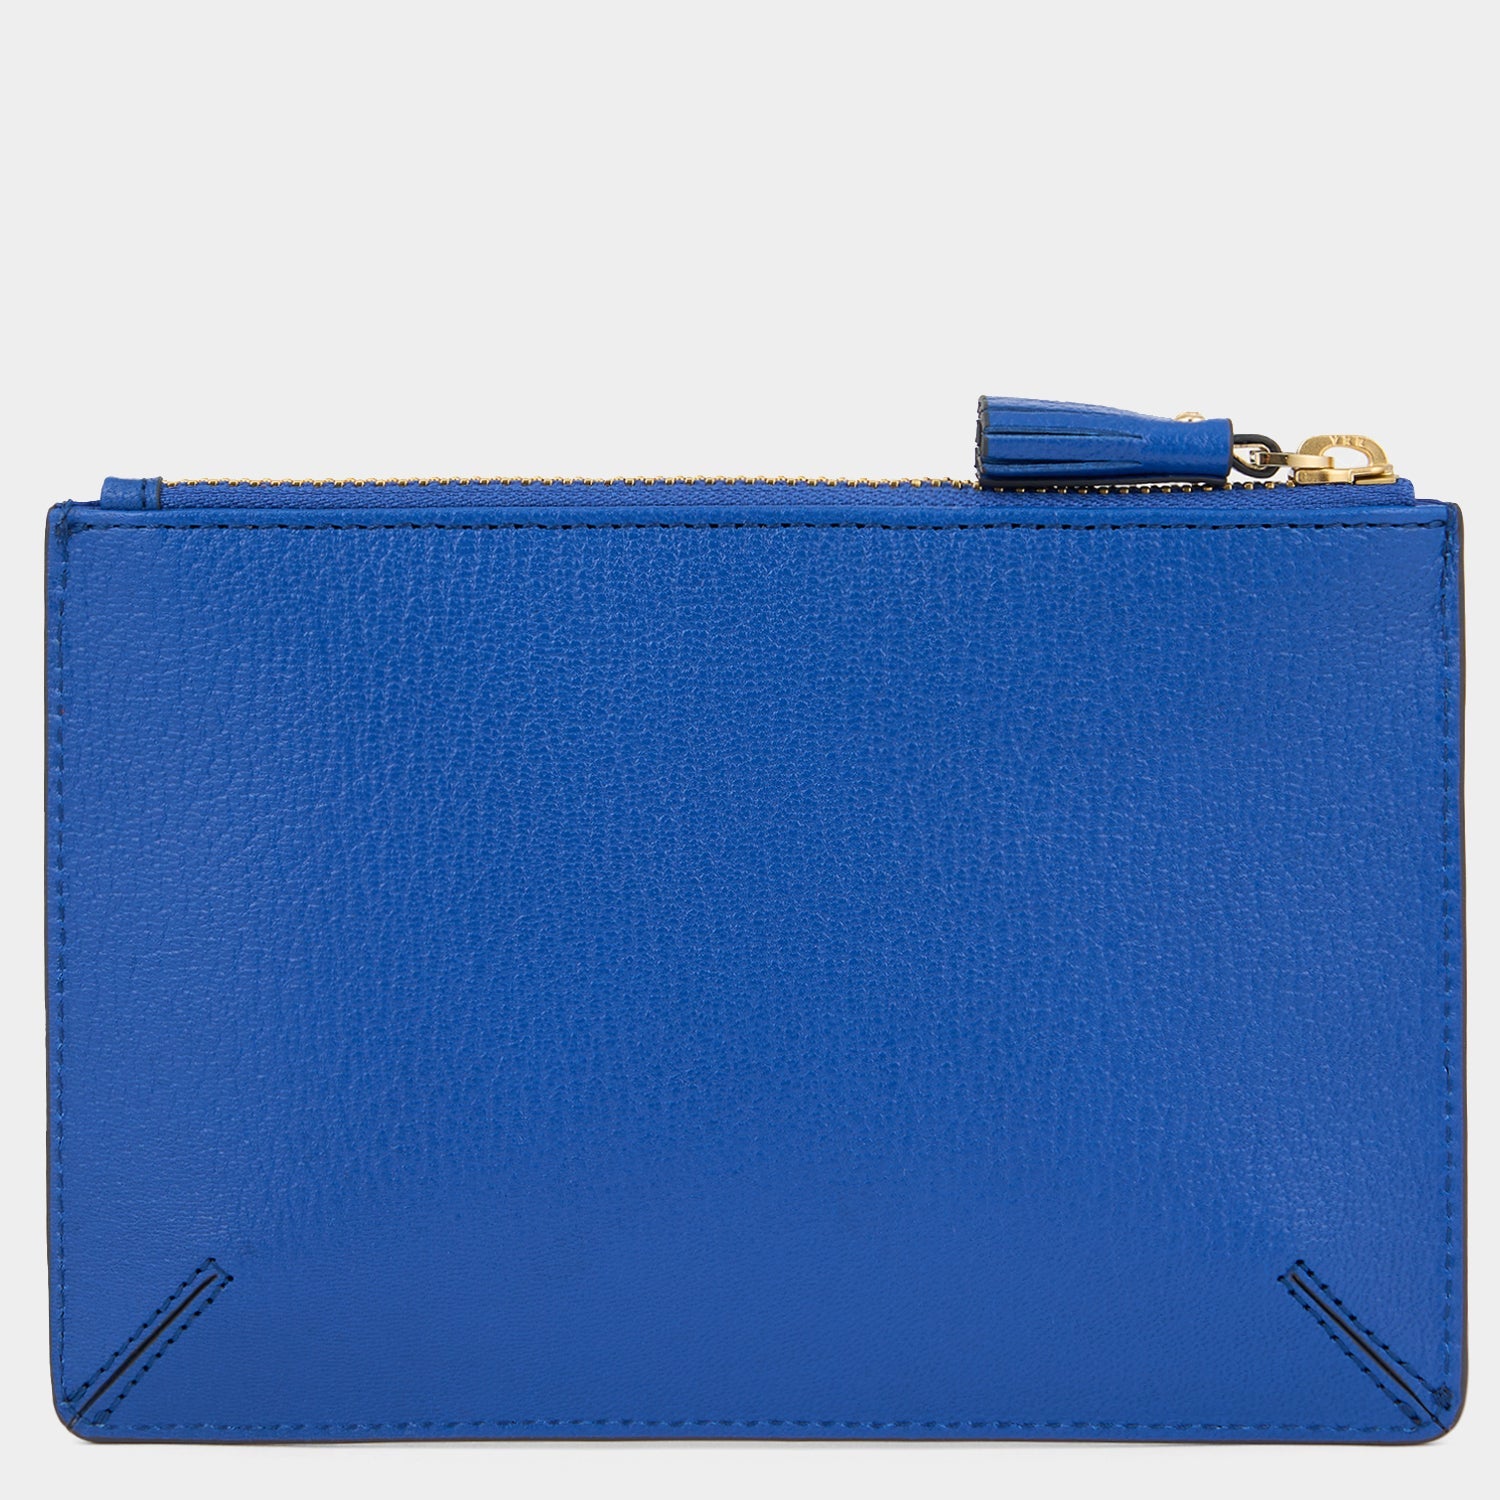 Bespoke Loose Pocket -

                  
                    Capra Leather in Electric Blue -
                  

                  Anya Hindmarch US
